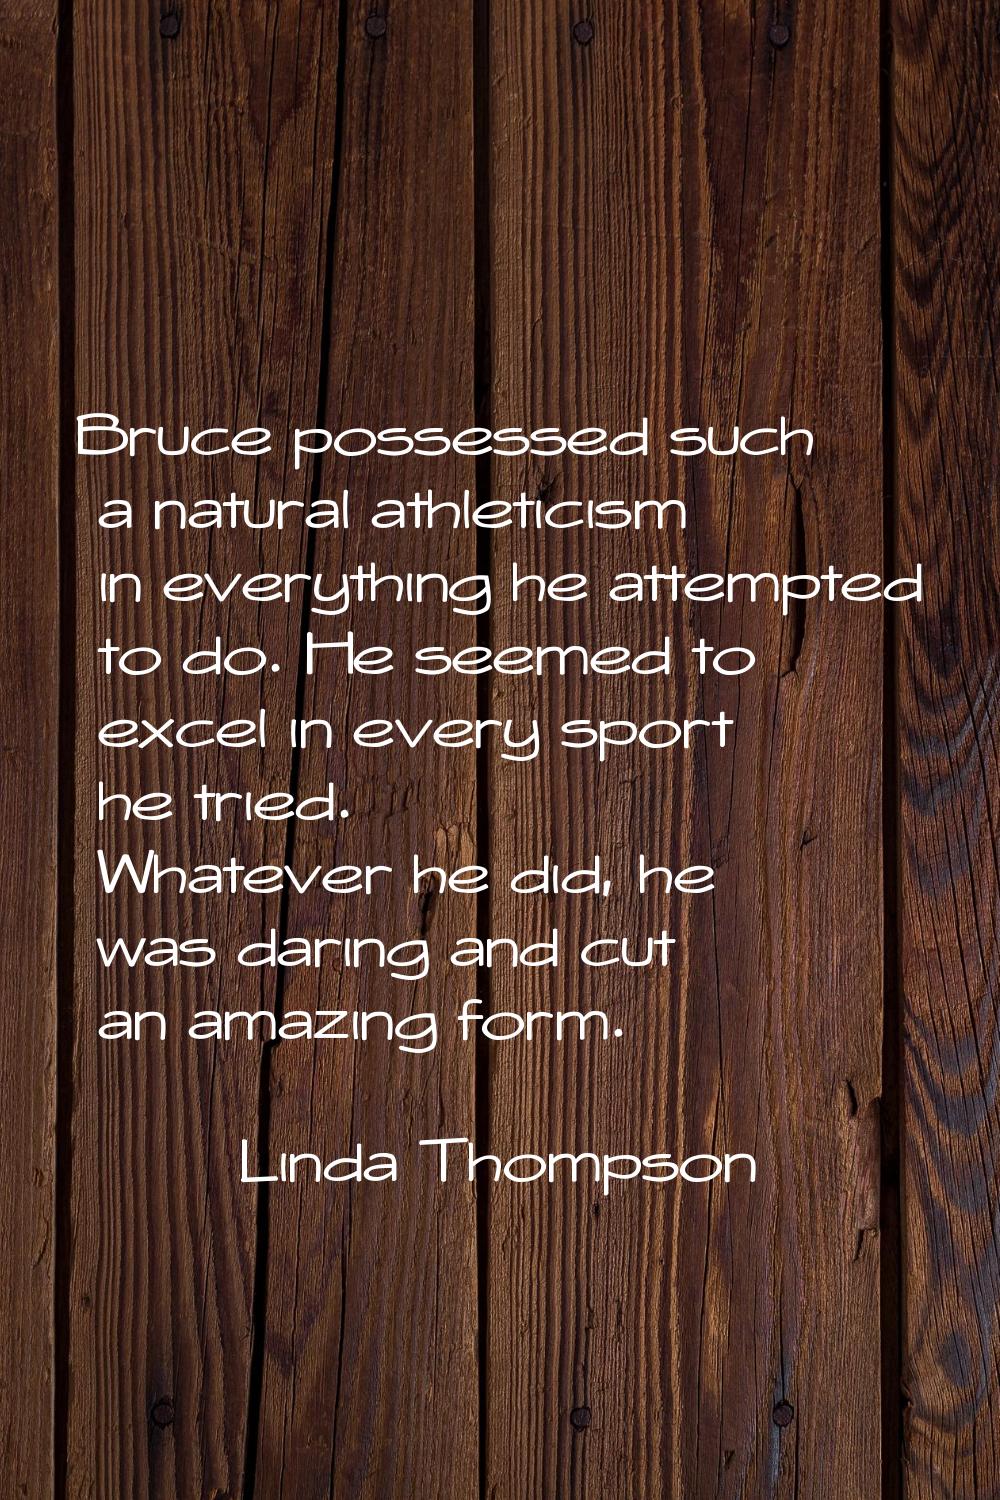 Bruce possessed such a natural athleticism in everything he attempted to do. He seemed to excel in 